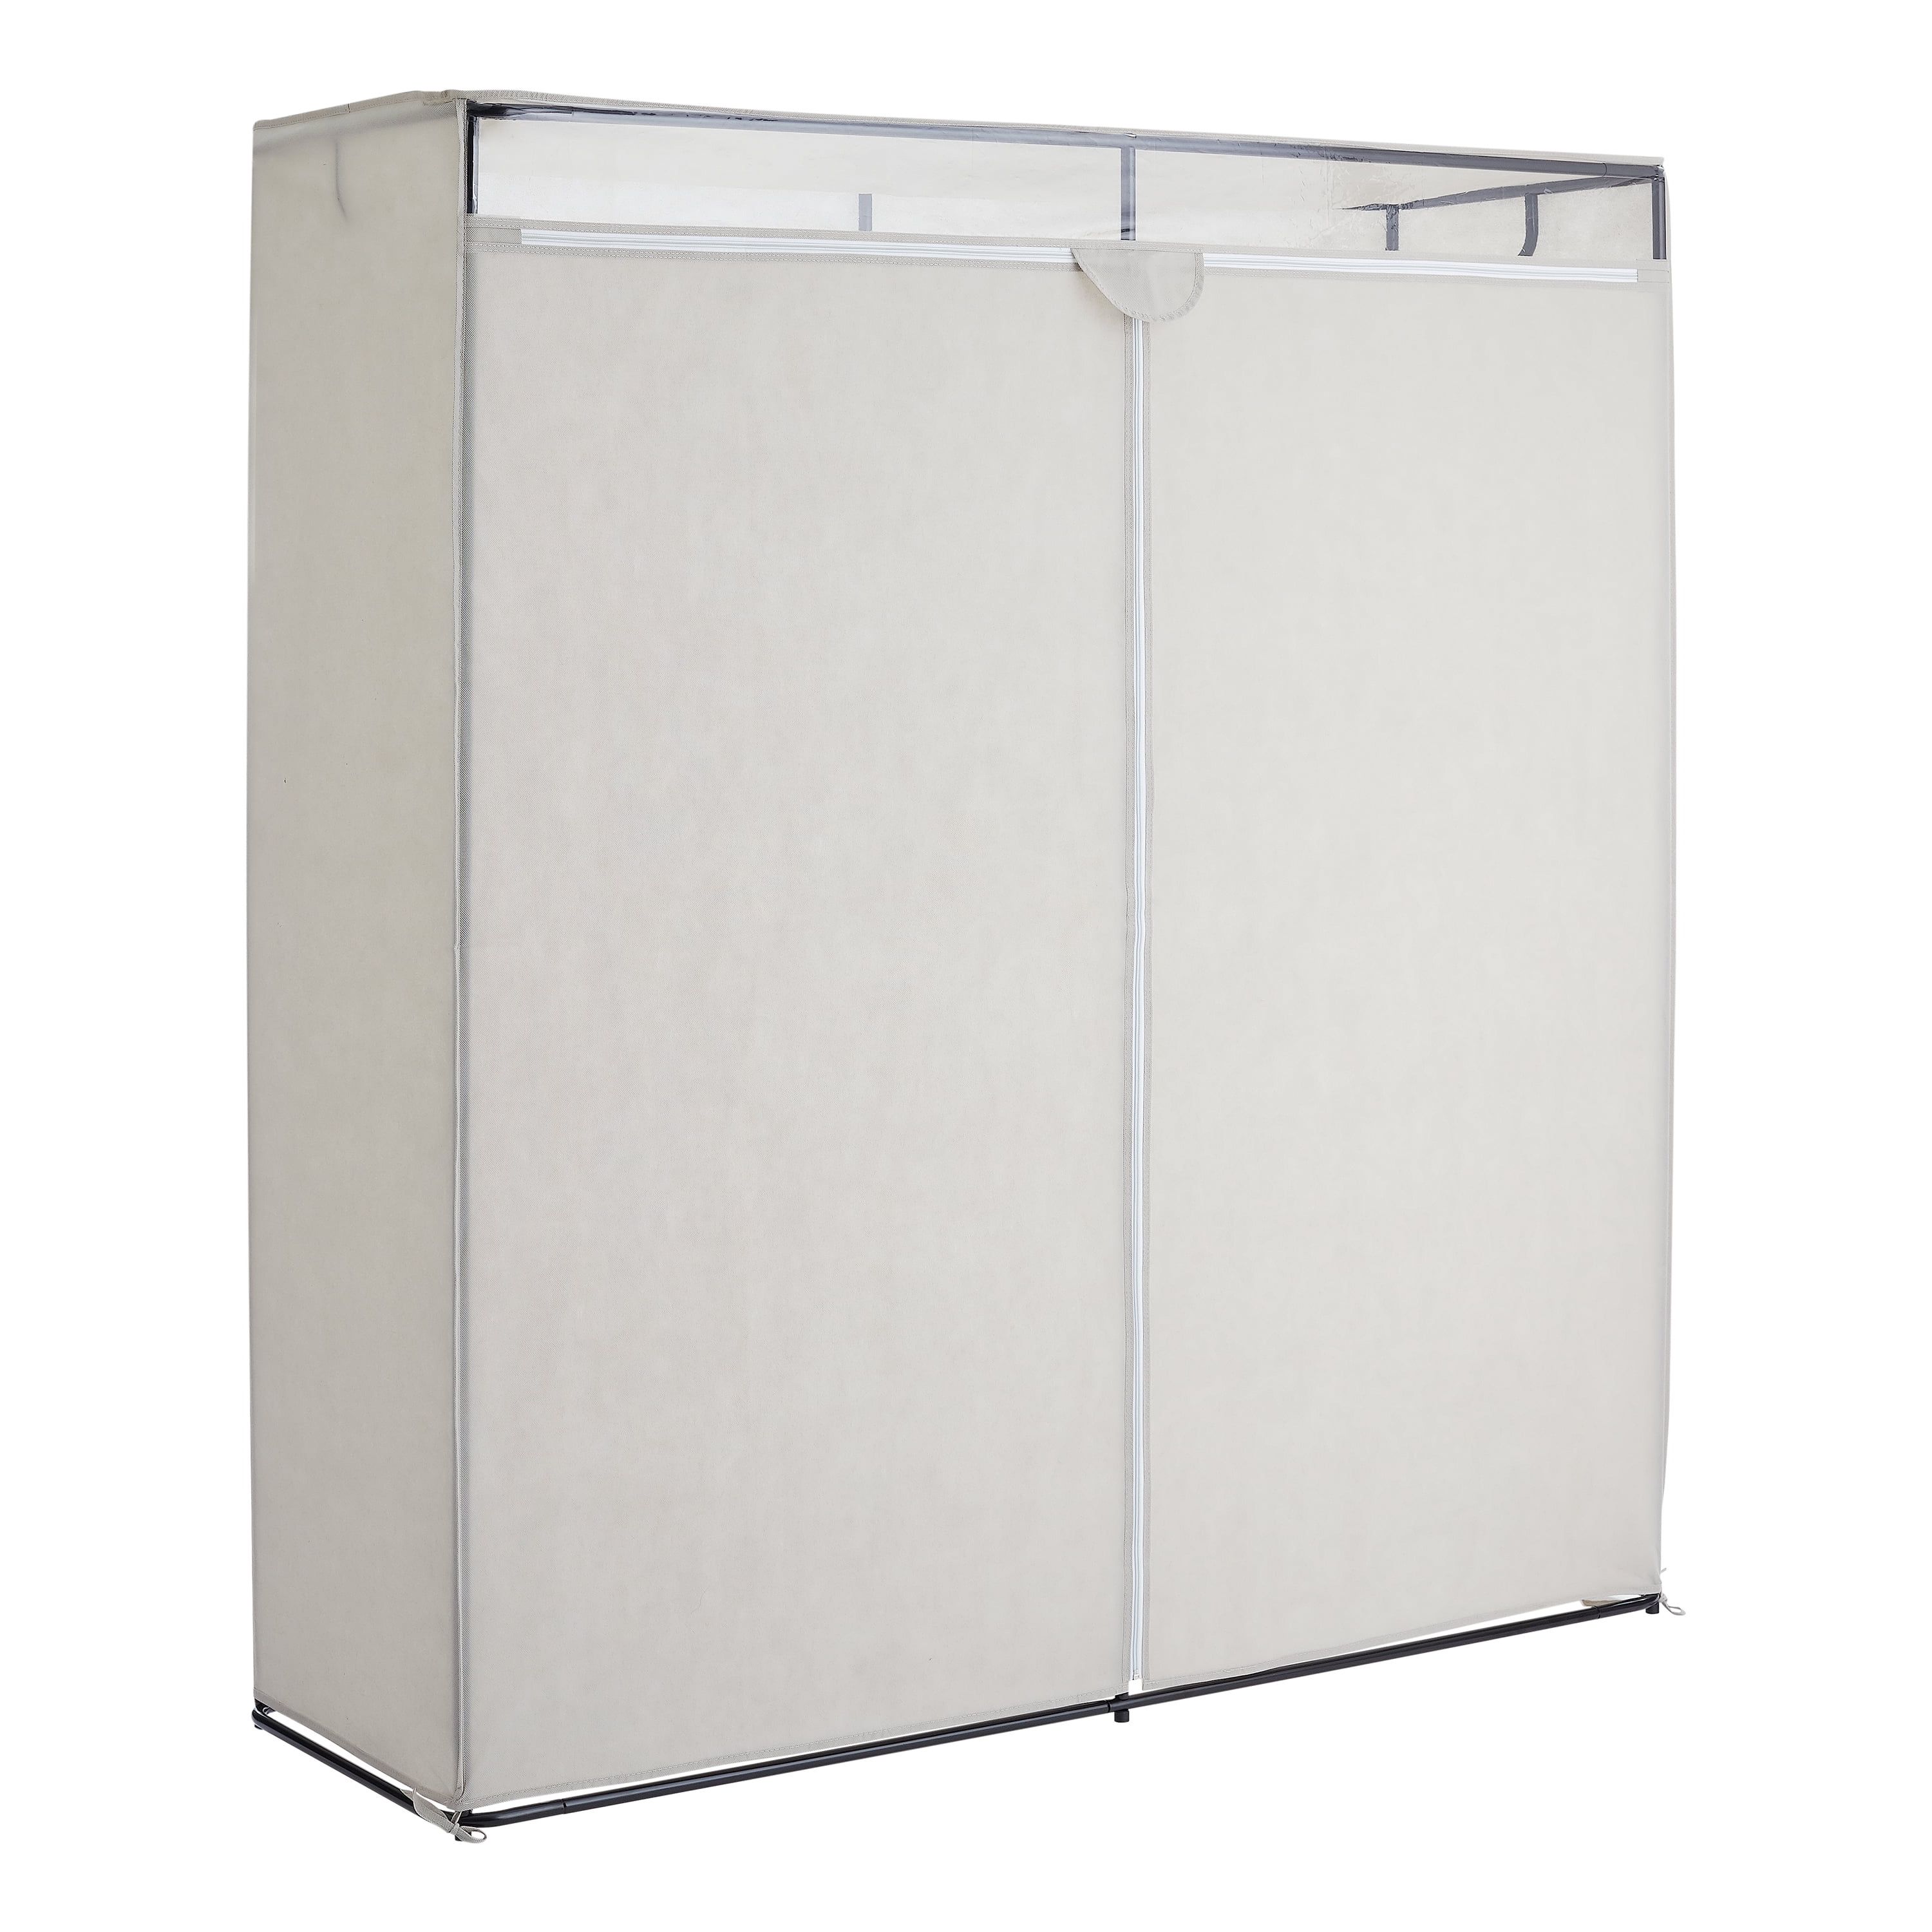 Newest Mainstays Single Tier Zippered Extra Wide Clothes Closet, 60", Grey Pumice  – Walmart Pertaining To Single Tier Zippered Wardrobes (Photo 1 of 10)